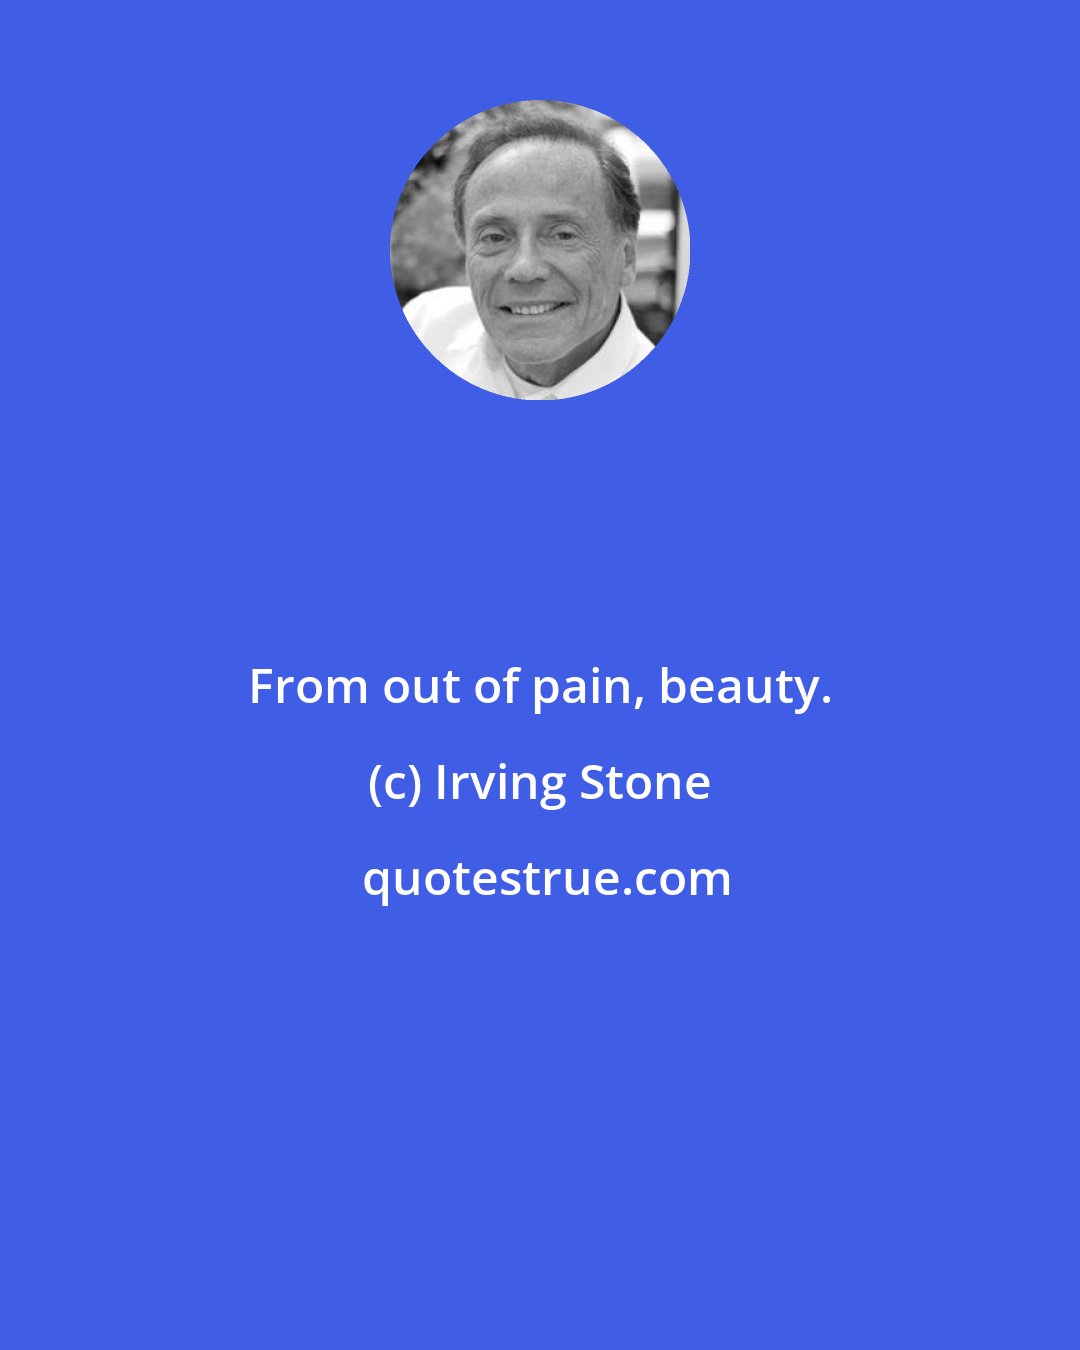 Irving Stone: From out of pain, beauty.